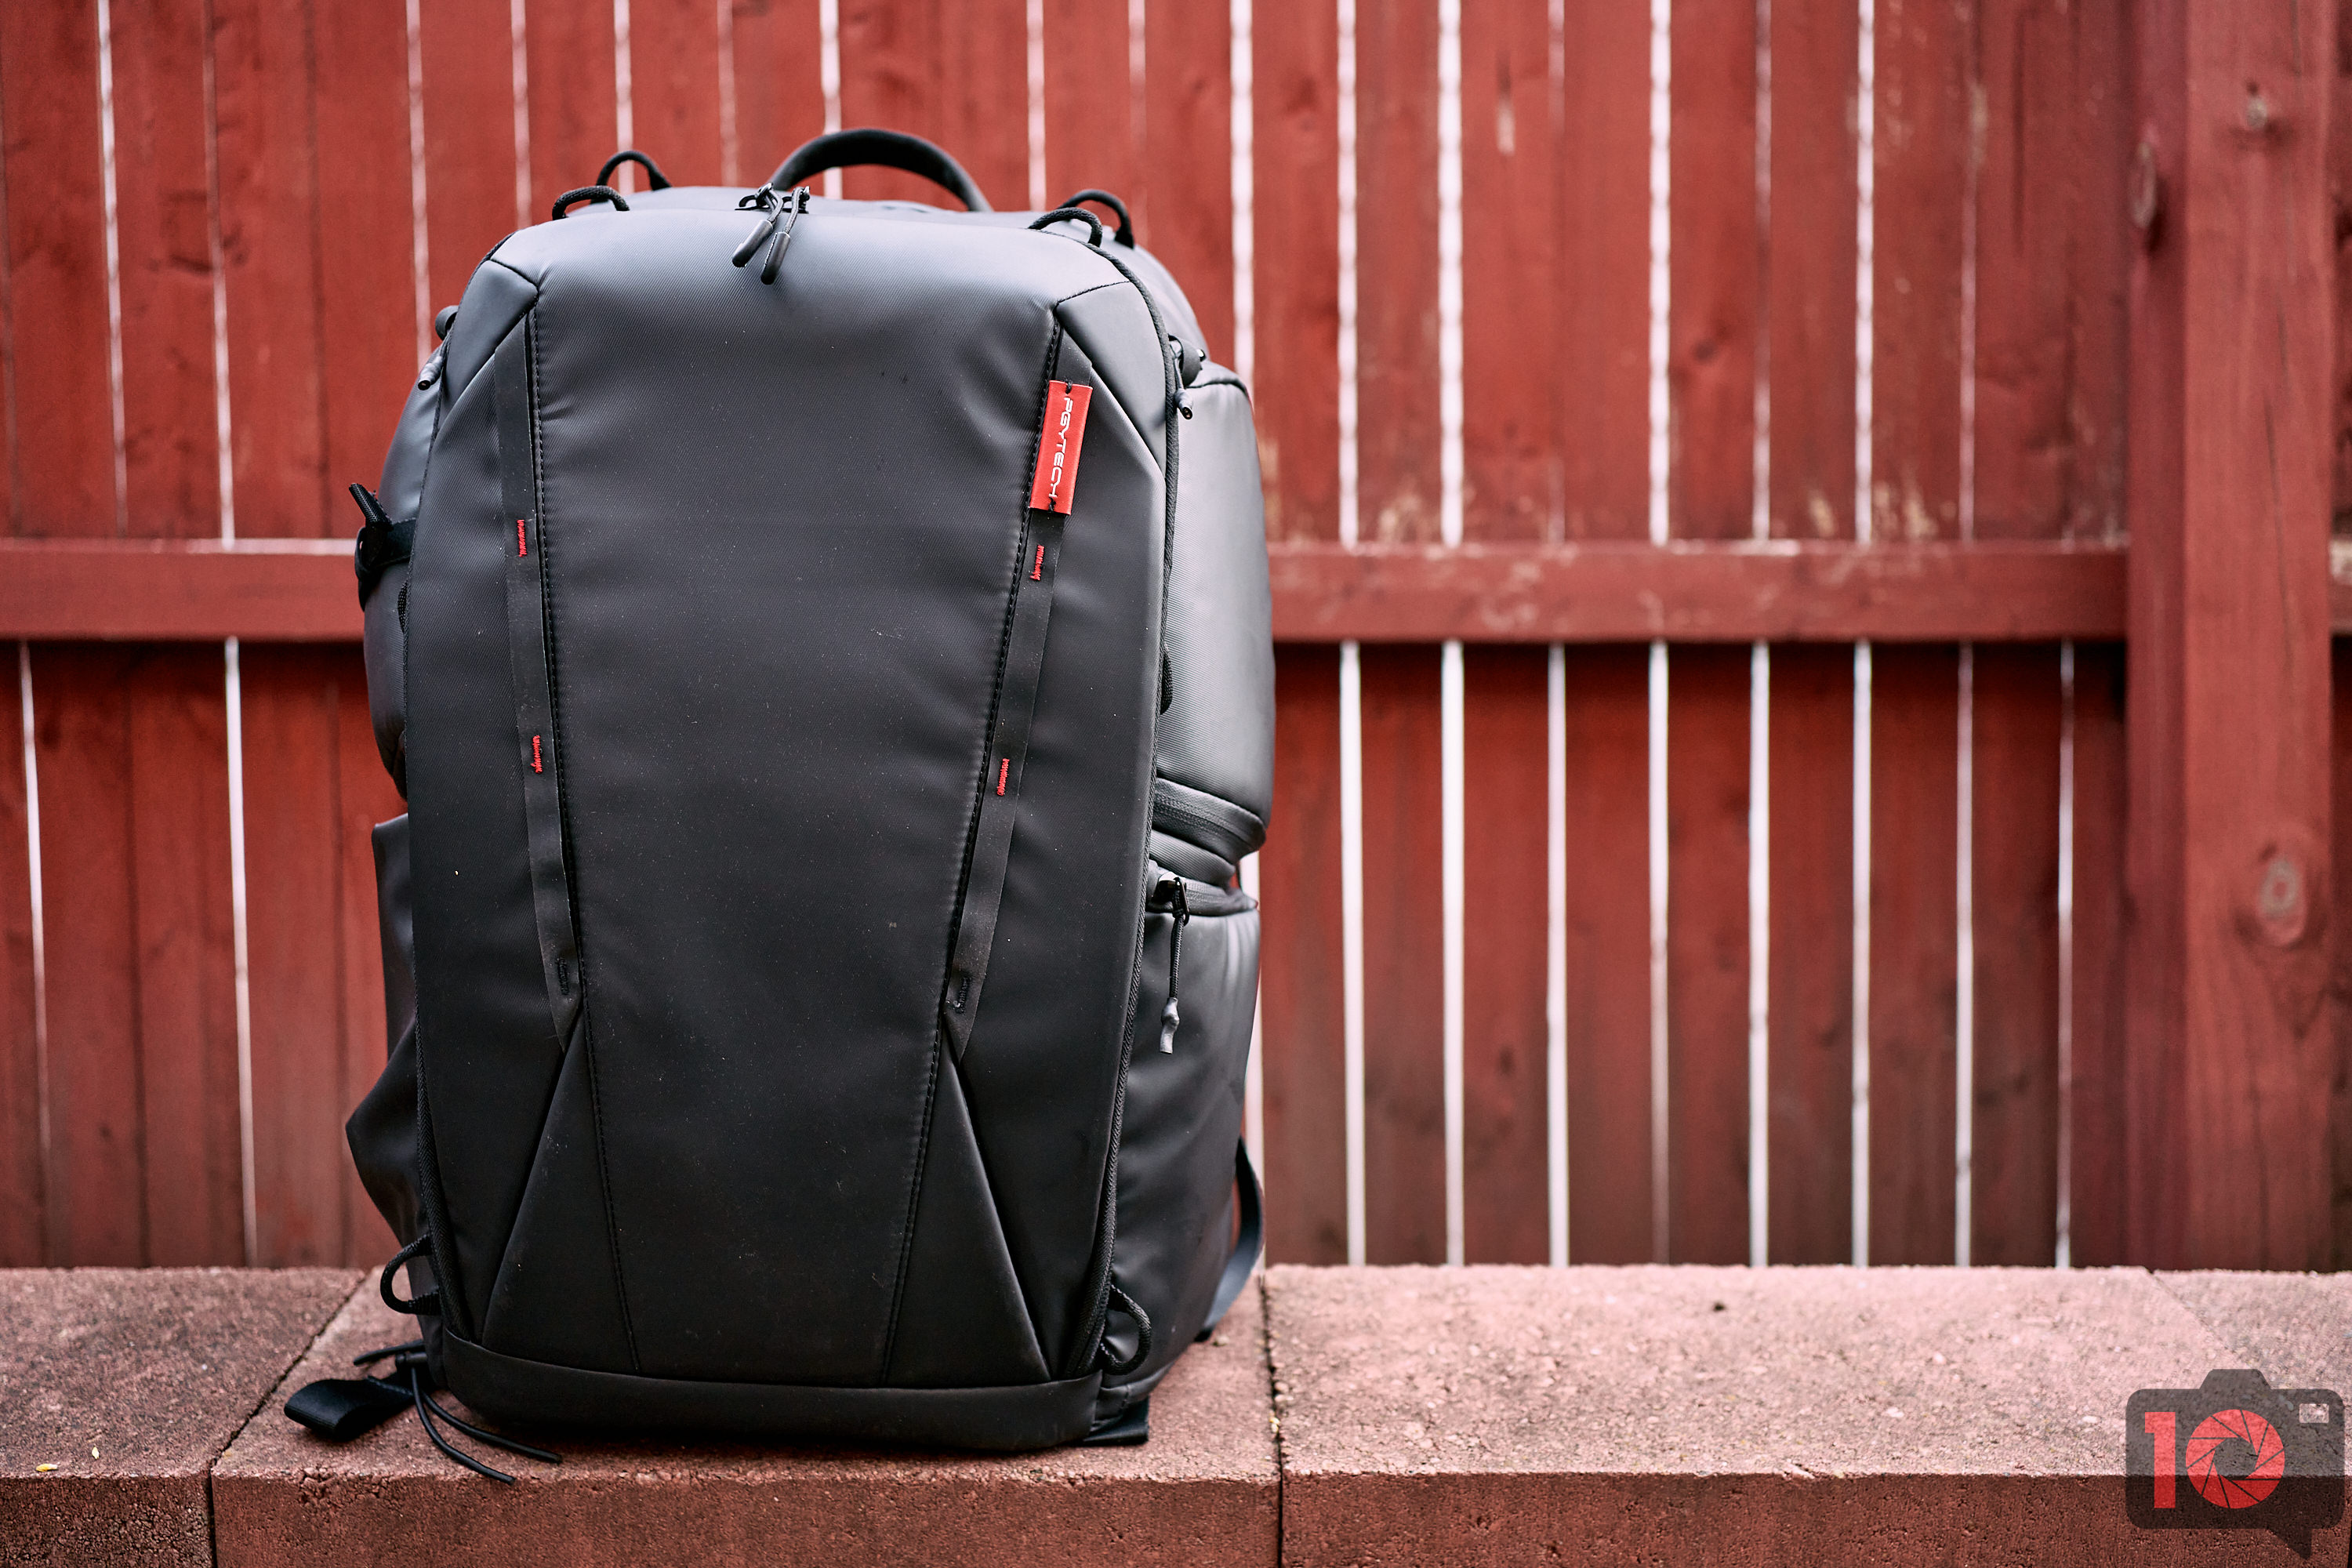 What's In My Camera Bag: PGYTECH OneMo Camera Backpack